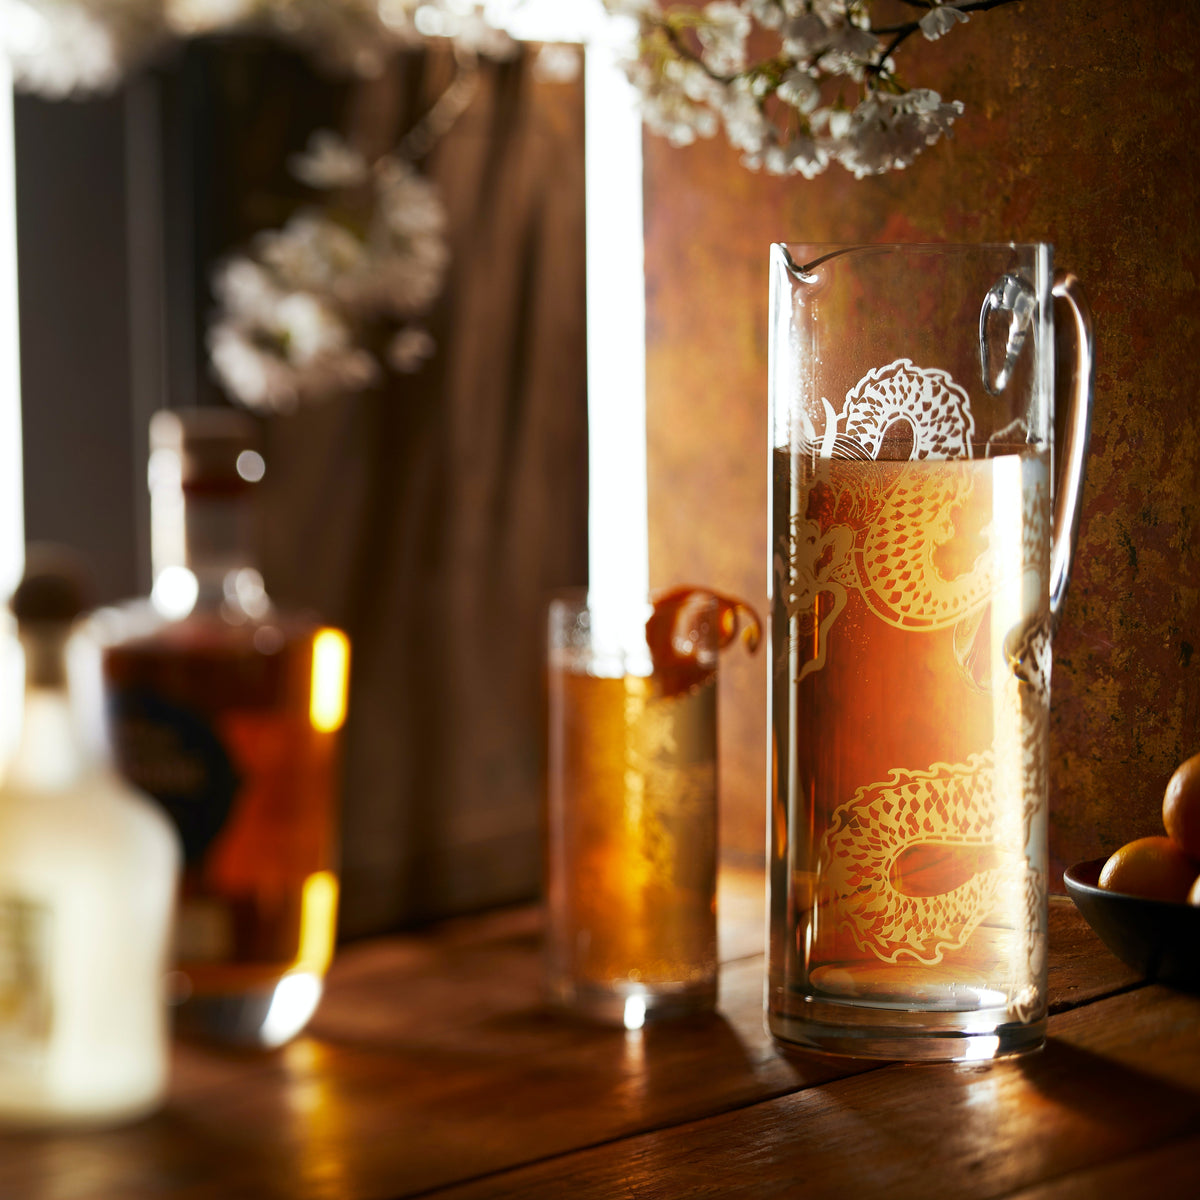 A sand etched dragon pitcher by Caskata filled with a cocktail on a rustic bar showcases the intricate design of the pattern.